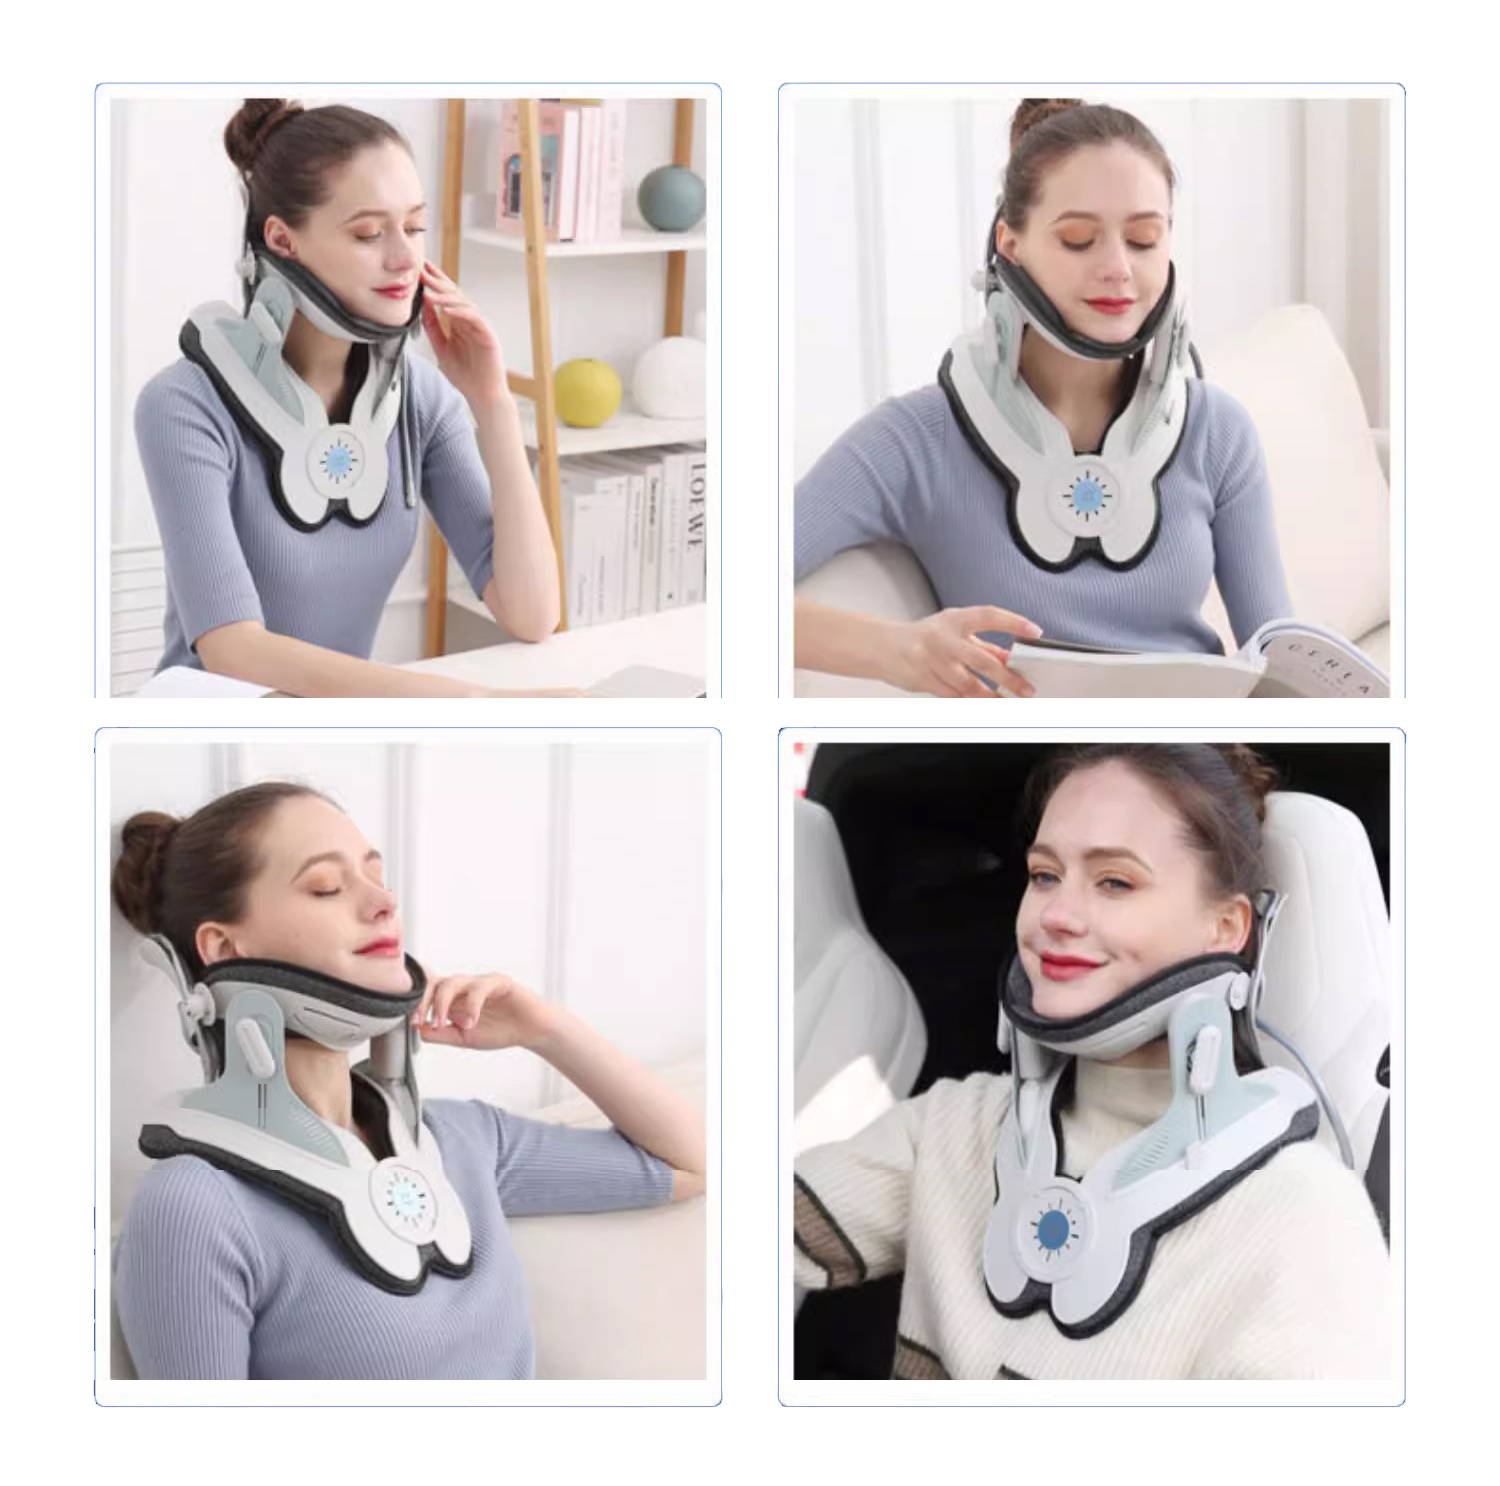 neck traction at home ,  dangers of cervical traction ,  best neck traction device ,  neck traction device for home ,  neck traction device reviews ,  chiropractic neck traction device ,  neck stretcher how to use ,  neck traction at home ,  dangers of cervical traction ,  best neck traction device ,  neck traction device for home ,  neck traction device reviews ,  cervical neck traction device ,  neck cervical traction device ,  best neck traction device ,  home neck traction device ,  neck traction device amazon ,  best neck traction device  ,  neck traction device reviews ,  chiropractic neck traction device ,  saunders neck traction device ,  neck traction device near me ,  cervical neck traction device reviews ,  how to use neck traction device ,  how to use cervical neck traction device ,  branfit neck traction device ,  neck traction device at home ,  neck air traction device ,  neck traction device australia ,  neck traction device uk ,  neck traction device nz USA ,  neck traction device how to use ,  neck traction device reddit ,  neck cloud - cervical traction device ,  neckfix cervical traction device ,  meningitis stiff neck test meningitis symptoms stiff neck relief stiff neck remedies how to get rid of stiff neck in 10 seconds when a stiff neck is serious stiff neck pain stiff neck treatment stiff neck exercises stiff neck from sleeping stiff neck on one side stiff neck treatment at home when a stiff neck is serious stiff neck causes stiff neck pain stiff neck treatment stiff neck exercises stiff neck on one side stiffness in neck stiff neck and headache stiff neck covid stiff neck remedy how to get rid of stiff neck in 10 seconds stiff neck causes when a stiff neck is serious how to get rid of stiff neck stiff neck pain how to fix a stiff neck stiff neck treatment stiff neck exercises stiff neck from sleeping how to treat a stiff neck in 60 seconds how long does a stiff neck last meningitis stiff neck stiff neck on one side stiff neck symptoms how to treat stiff neck how to cure stiff neckNeck traction  device , Cervical tractor , cervical traction device , saunders cervical traction device , neck pain relief , neck pain treatment , neck brace , neck hammock , neckk traction brace , effective neck pain relief , fast neck pain relief 